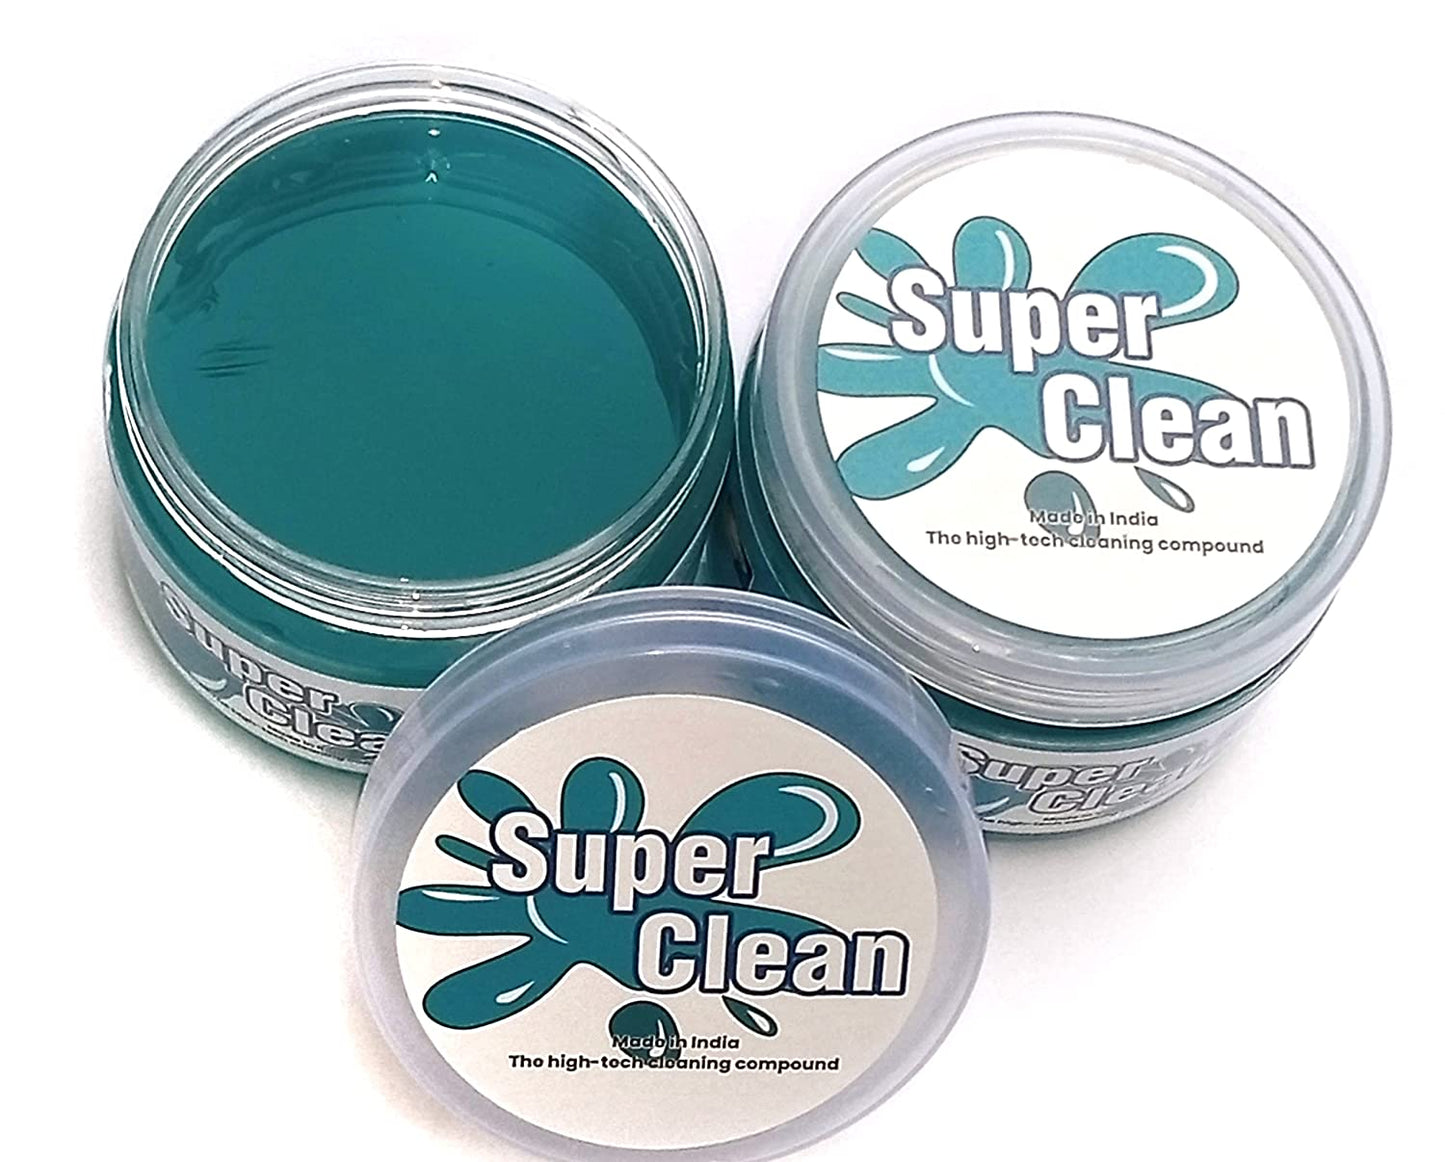 Super Clean Gel for Removing dust of Car Accessories, Keyboard, Laptops etc,Color Blue, Weight 160 Gram pack of 2